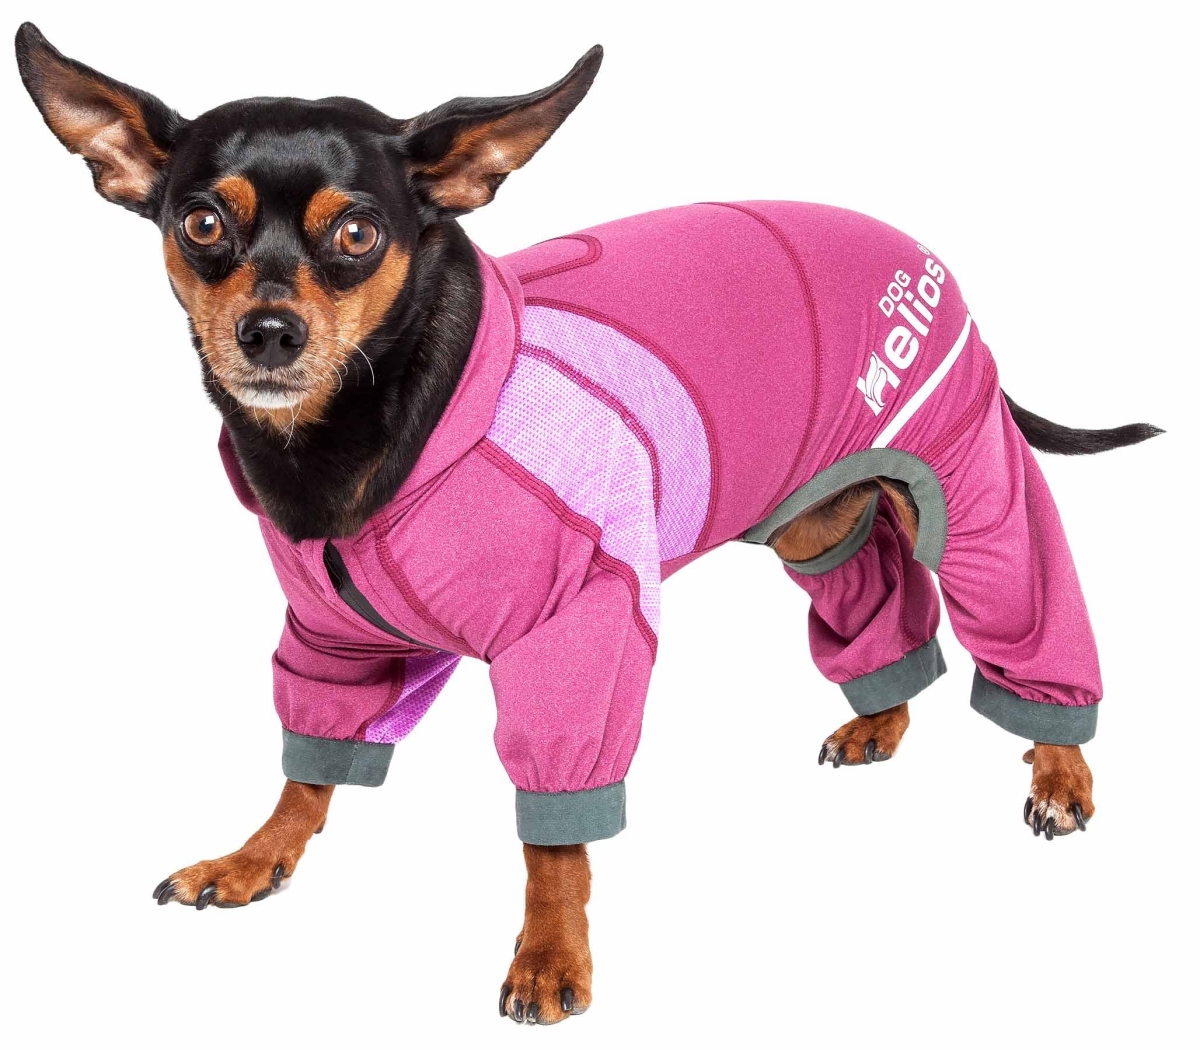 Yghl7pklg Namastail 4-way Stretch Breathable Full Bodied Performance Yoga Dog Hoodie Tracksuit - Pink, Large